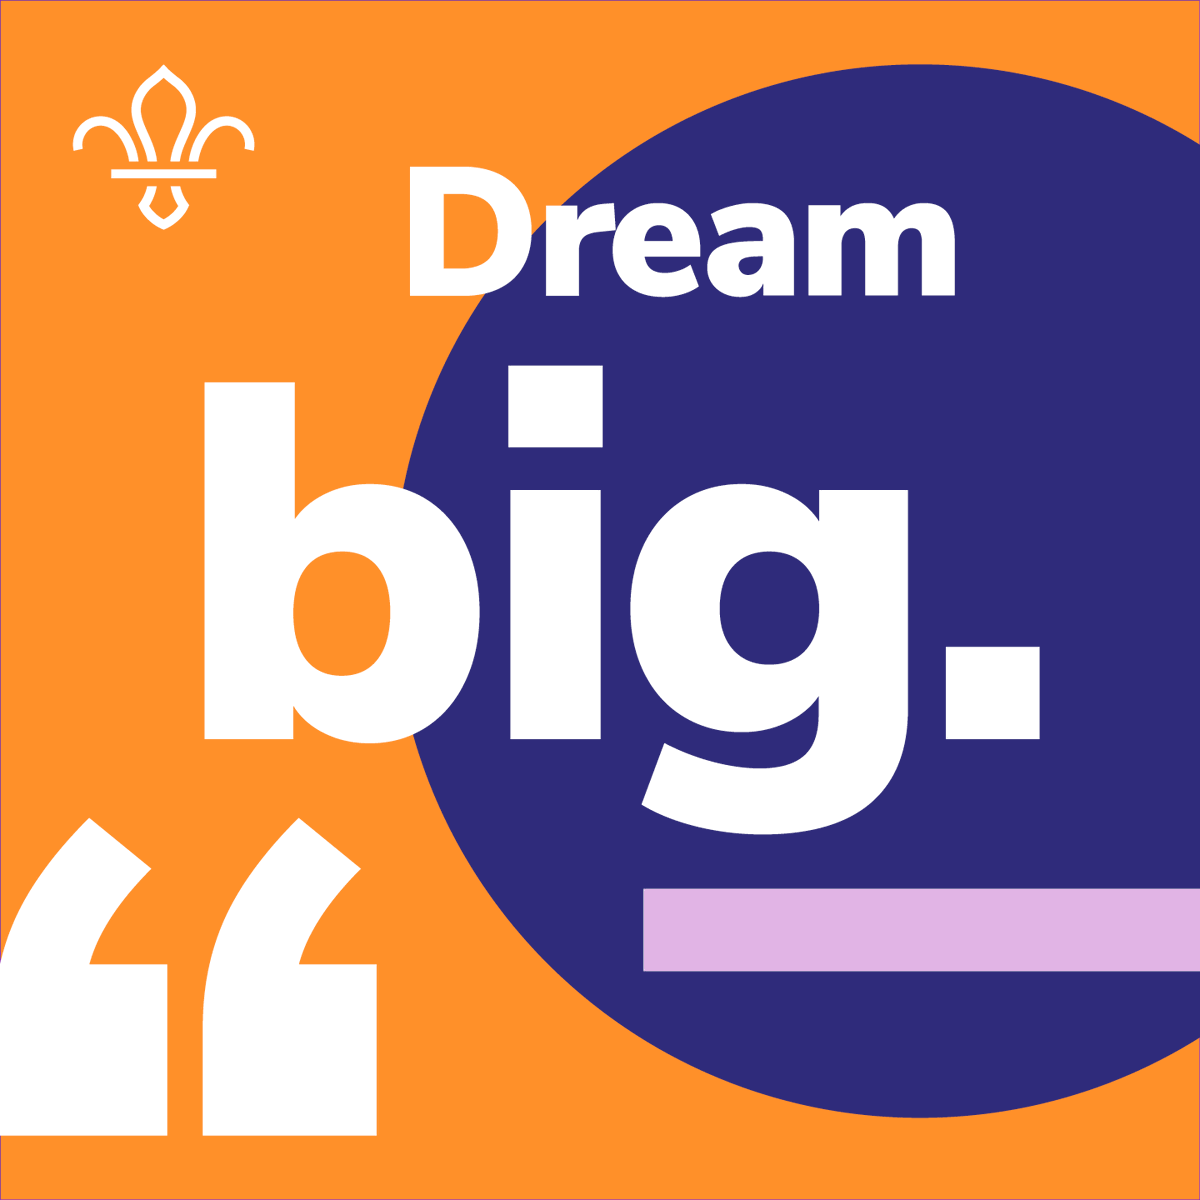 If the sky’s the limit, then how did we land on the moon? You can do anything if you dream big and get stuck in. Start your Scouting journey today, visit blackpoolscouts.org.uk/join